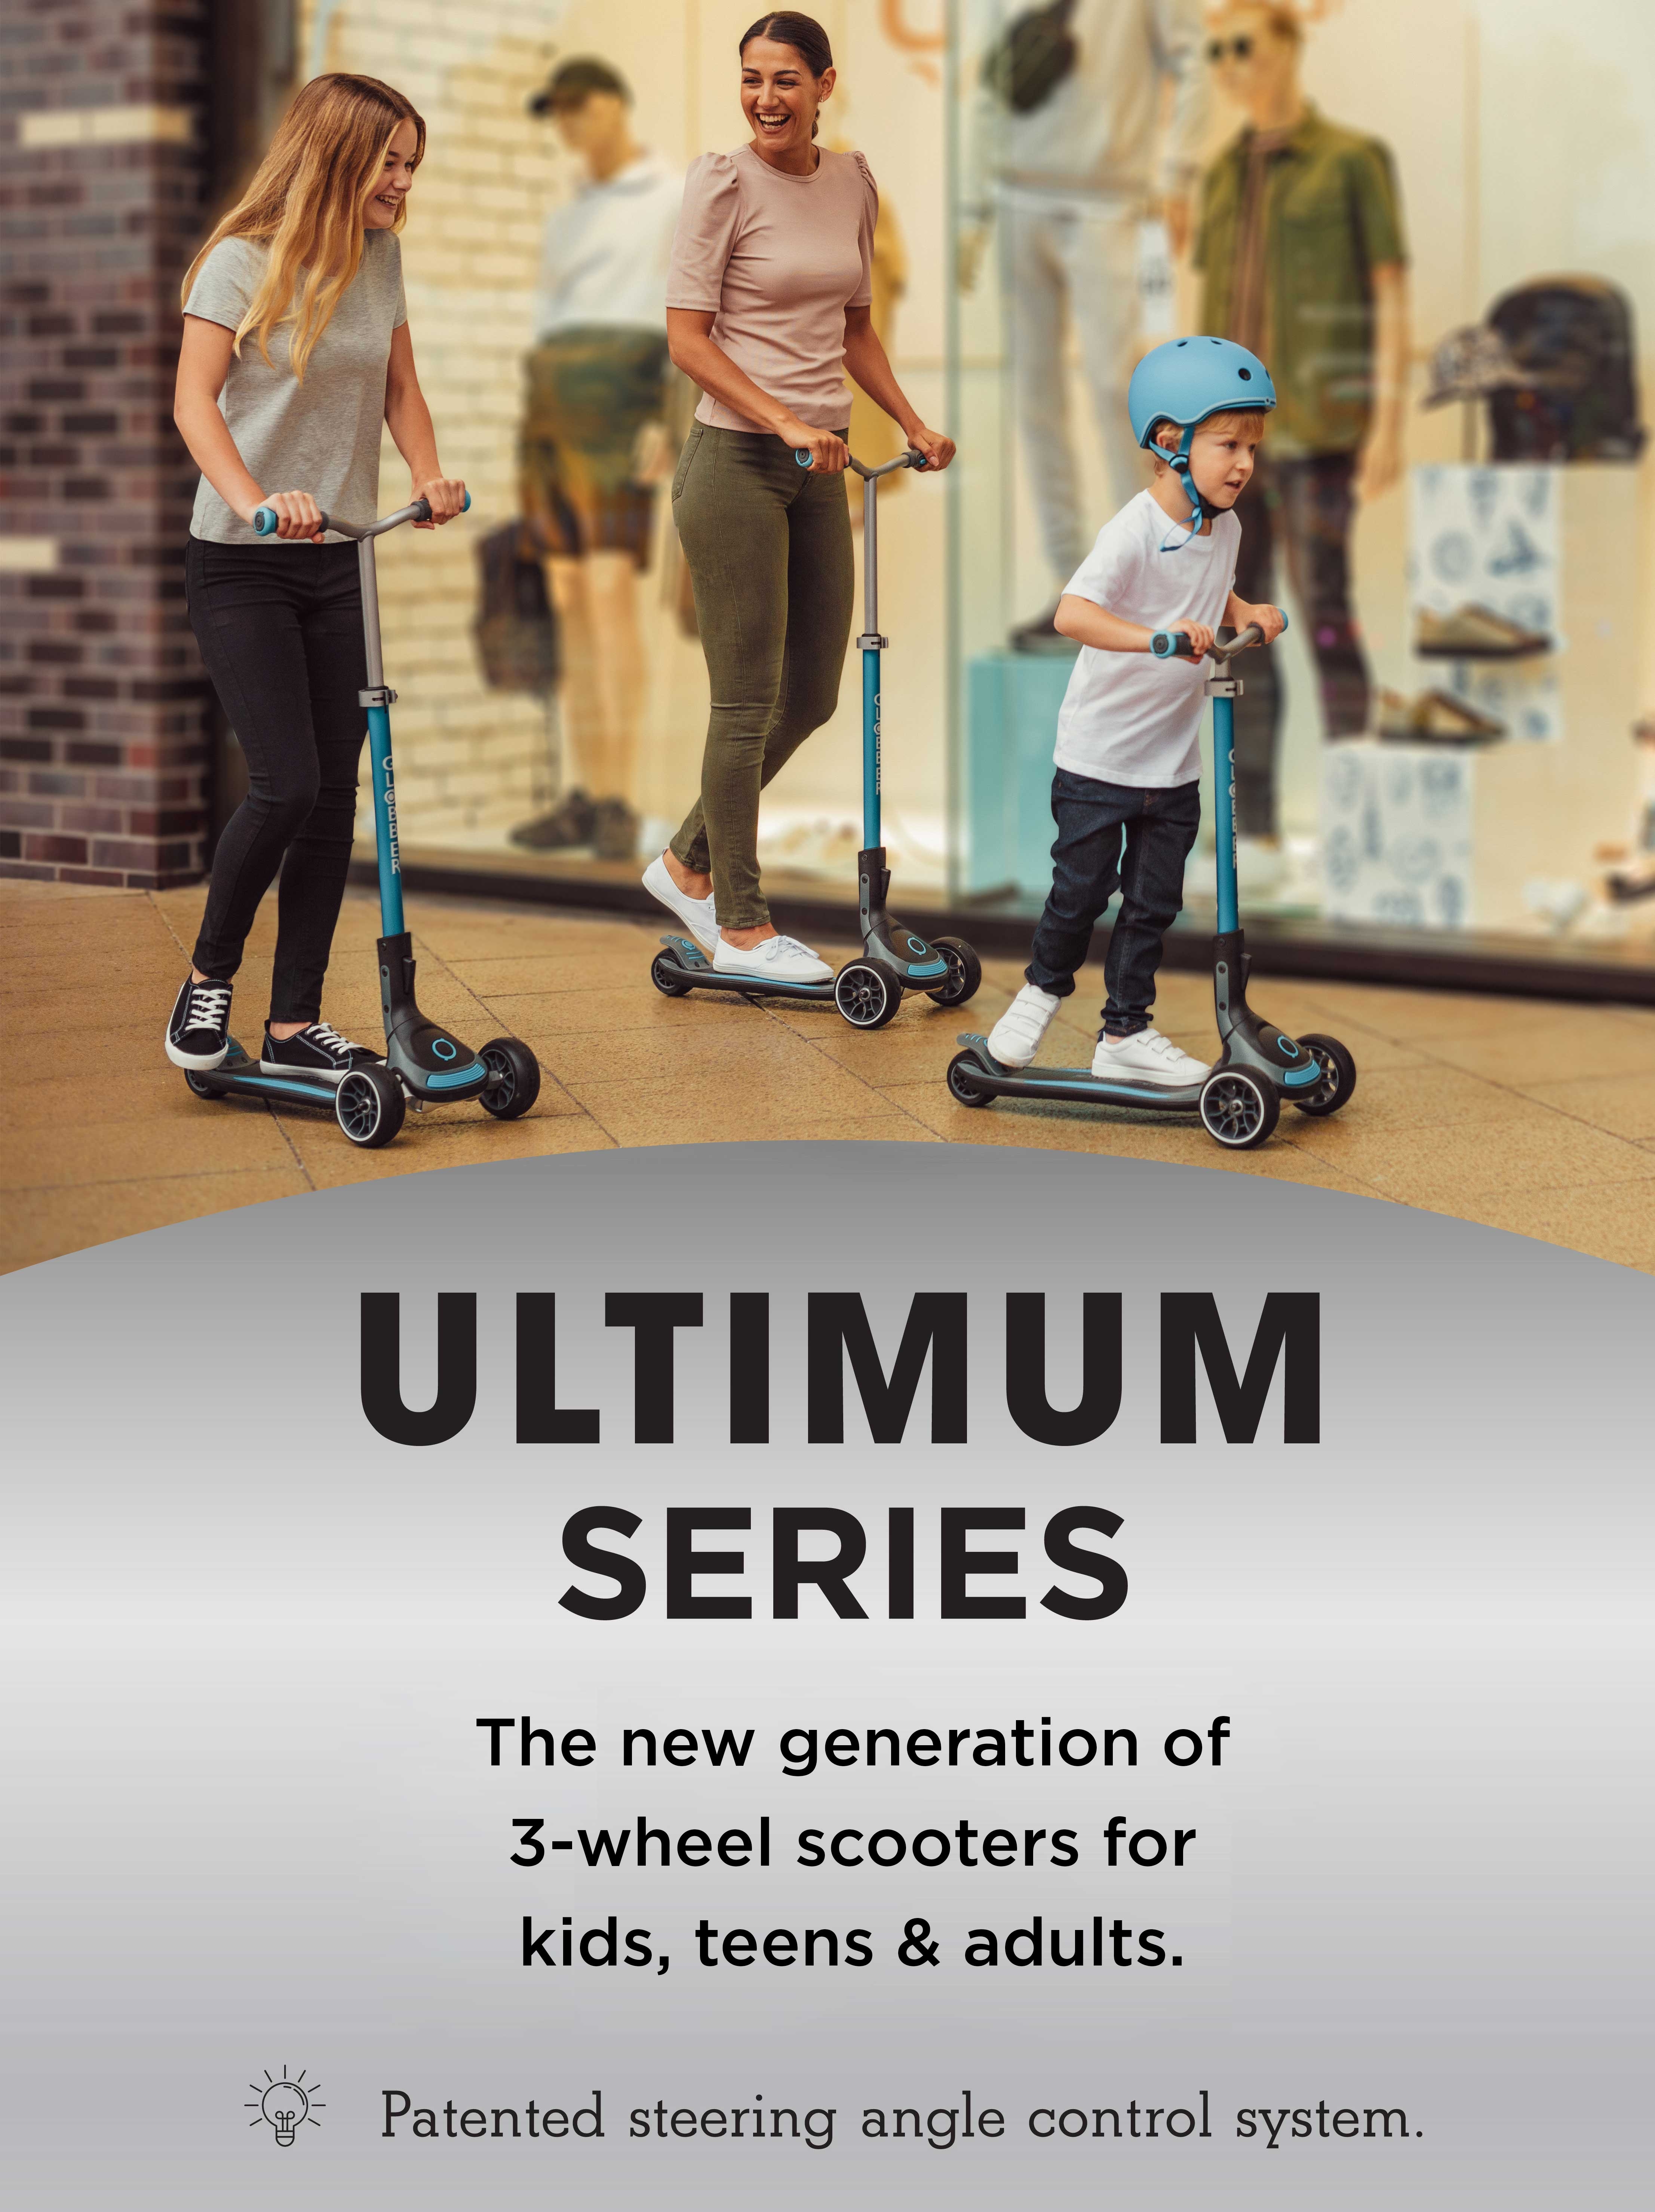 ULTIMUM is the first-ever scooter in so many ways